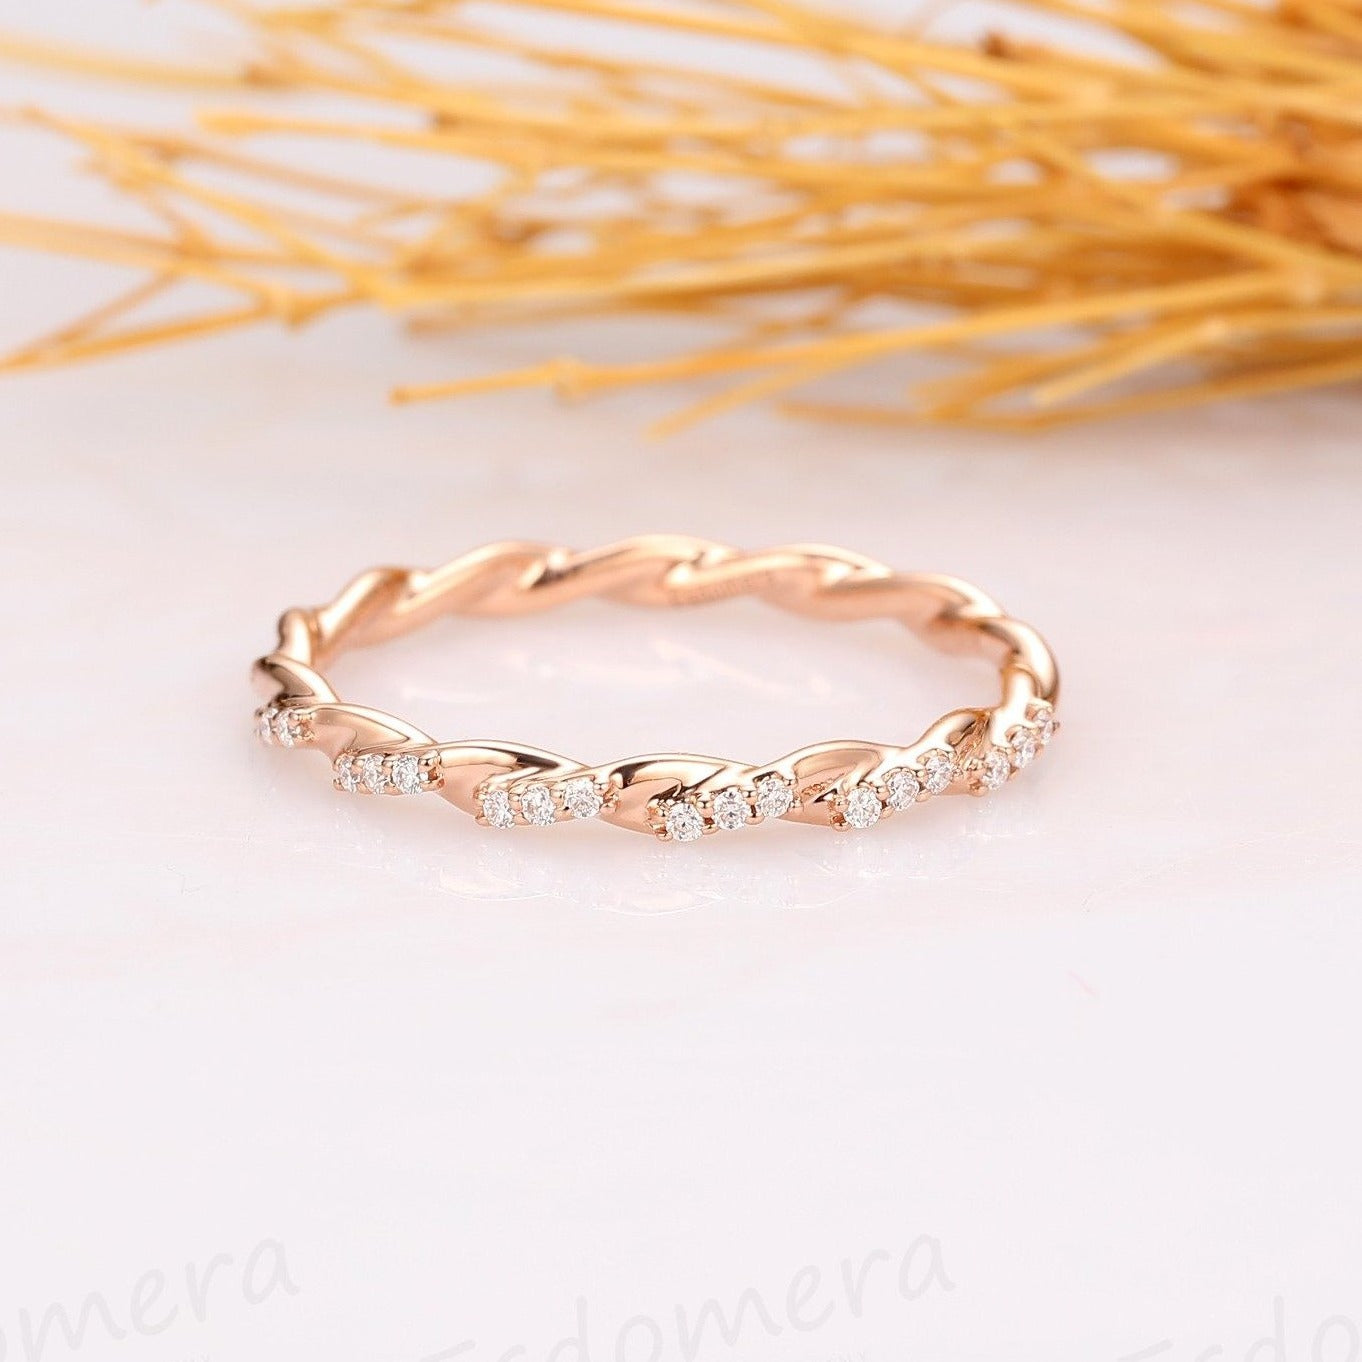 Rope Twist Wedding Band, Solid 14K Rose Gold Anniversary Ring